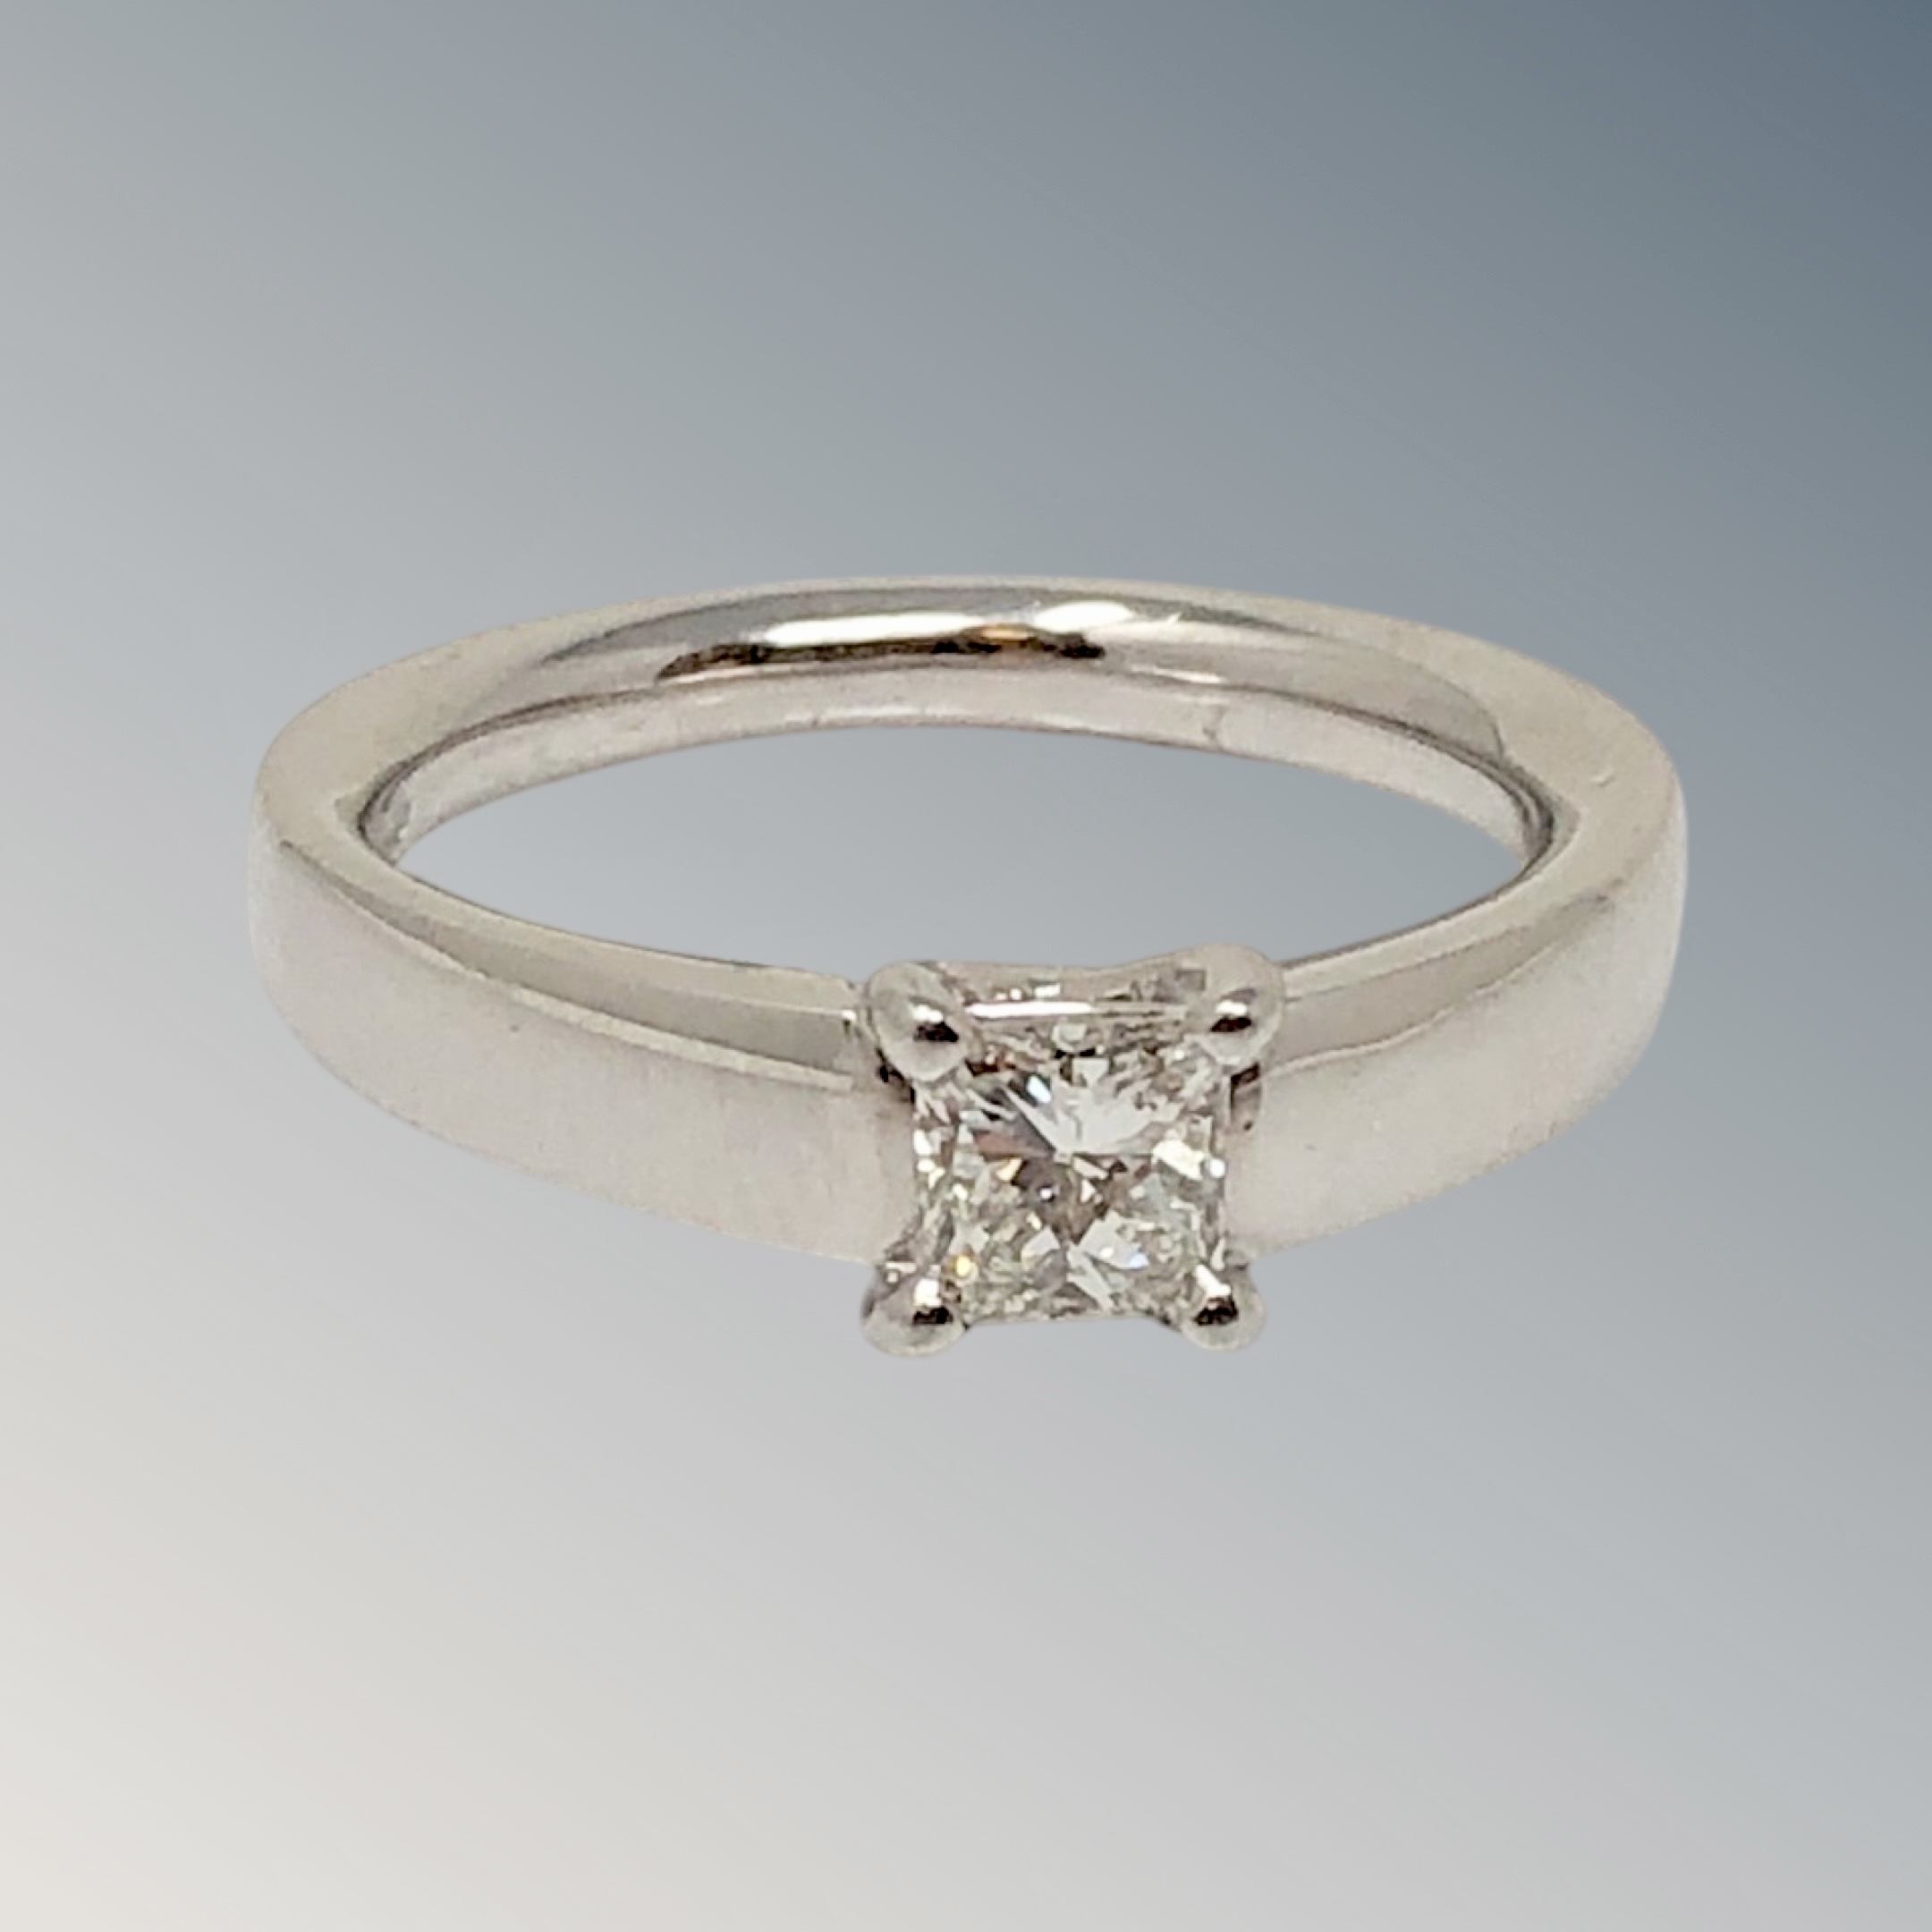 An 18ct white gold princess cut solitaire diamond ring, approximately 0.